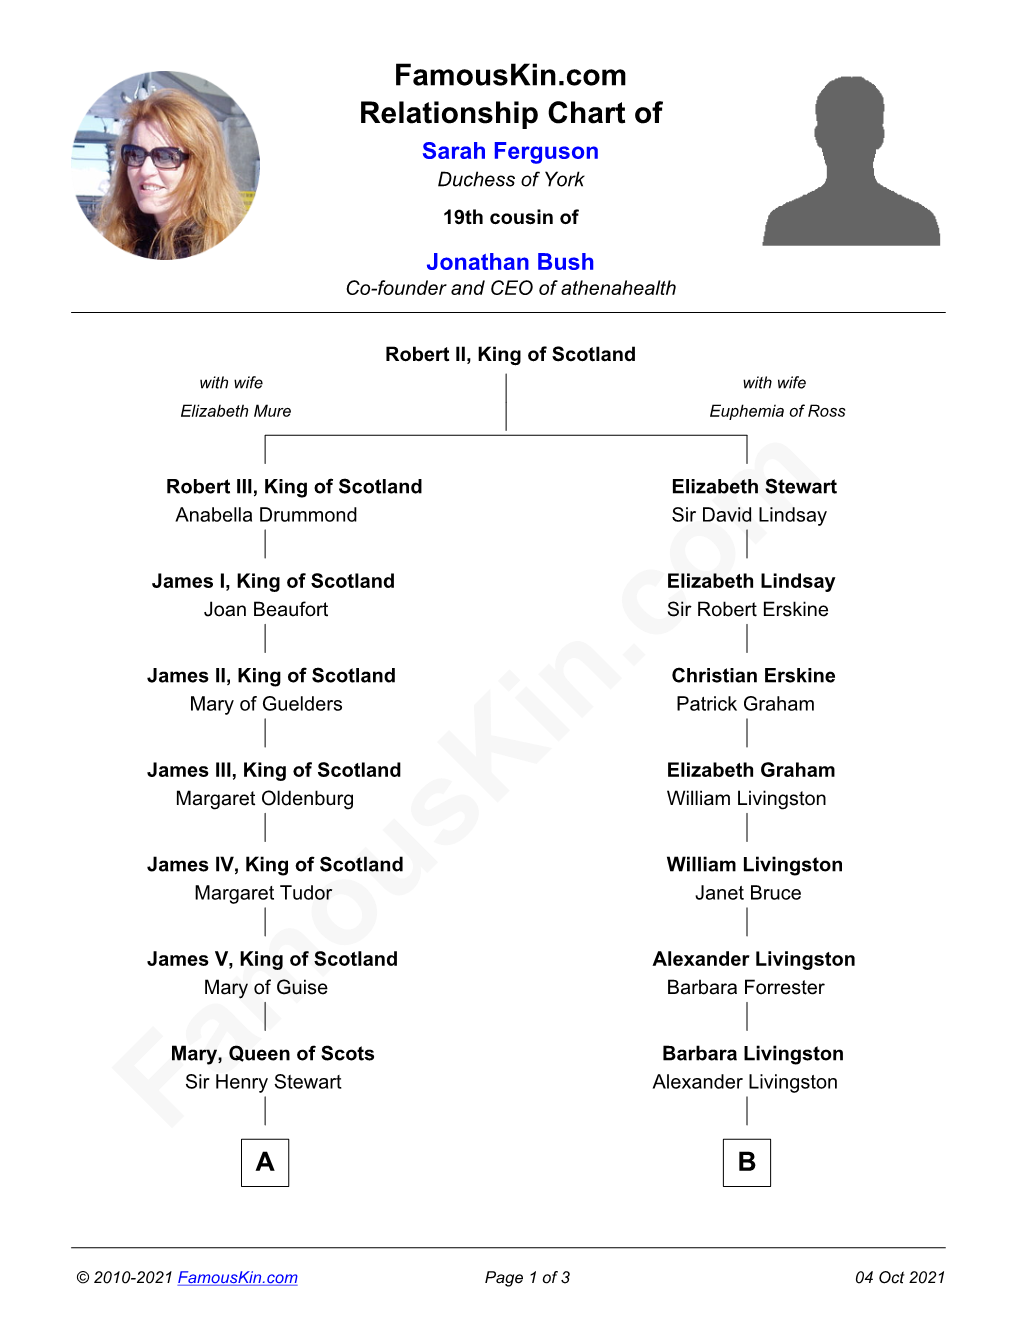 Famouskin.Com Relationship Chart of Sarah Ferguson Duchess of York 19Th Cousin of Jonathan Bush Co-Founder and CEO of Athenahealth